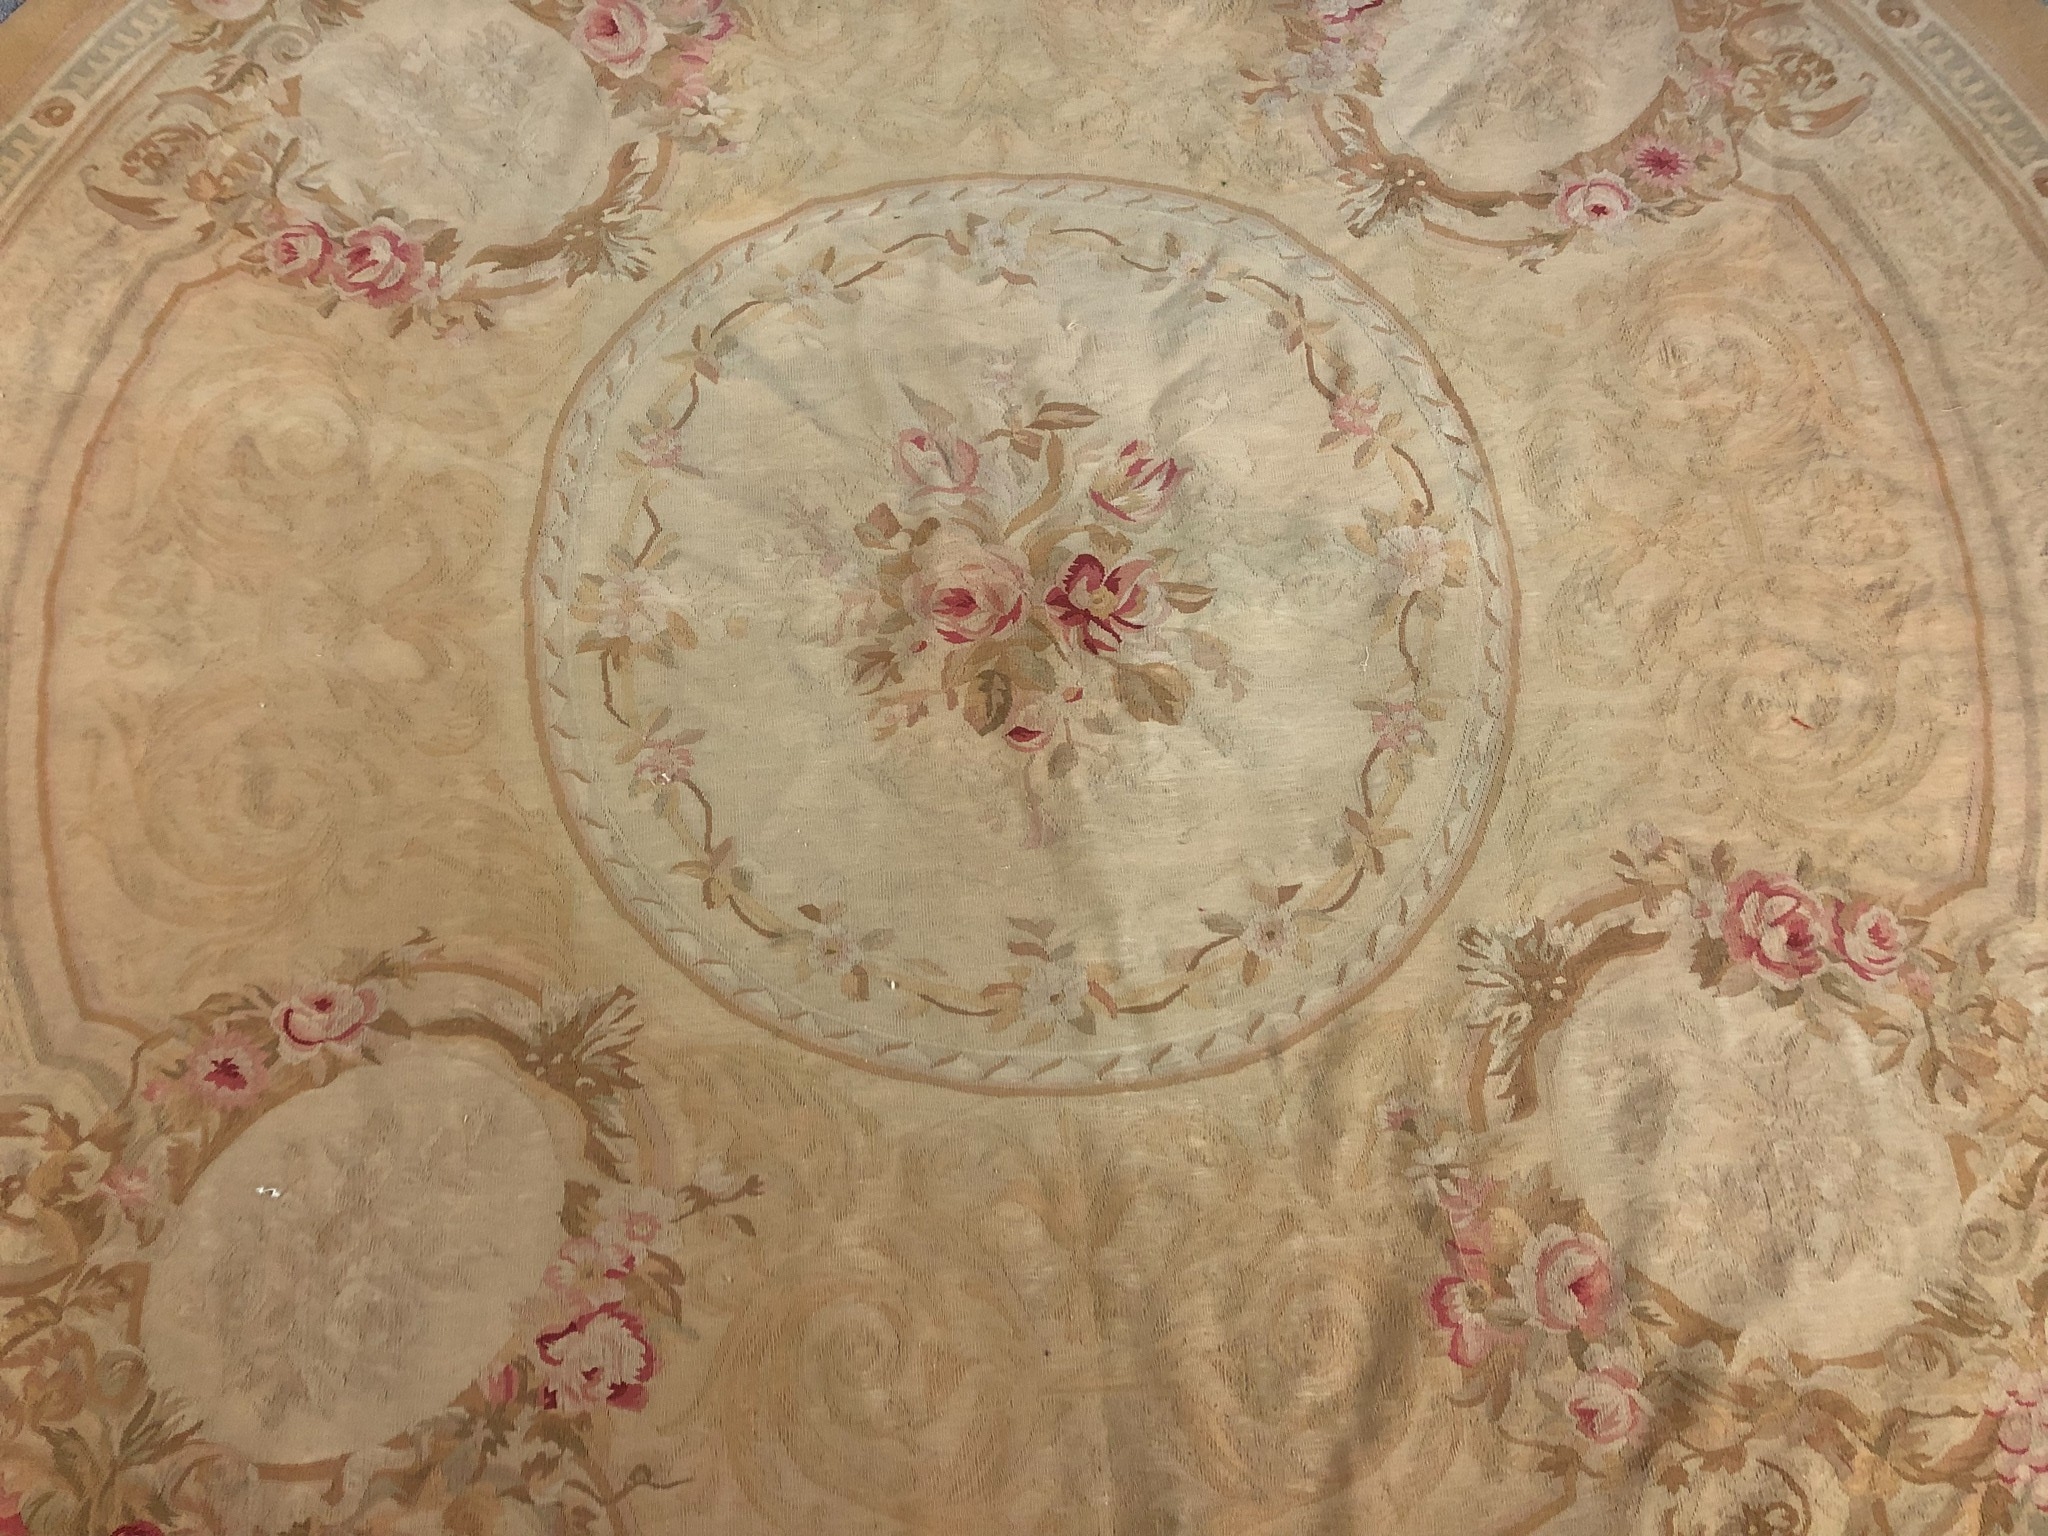 A hand woven Aubusson style rug with floral spray medallions on a beige ground. Dia.240cm. - Image 2 of 4